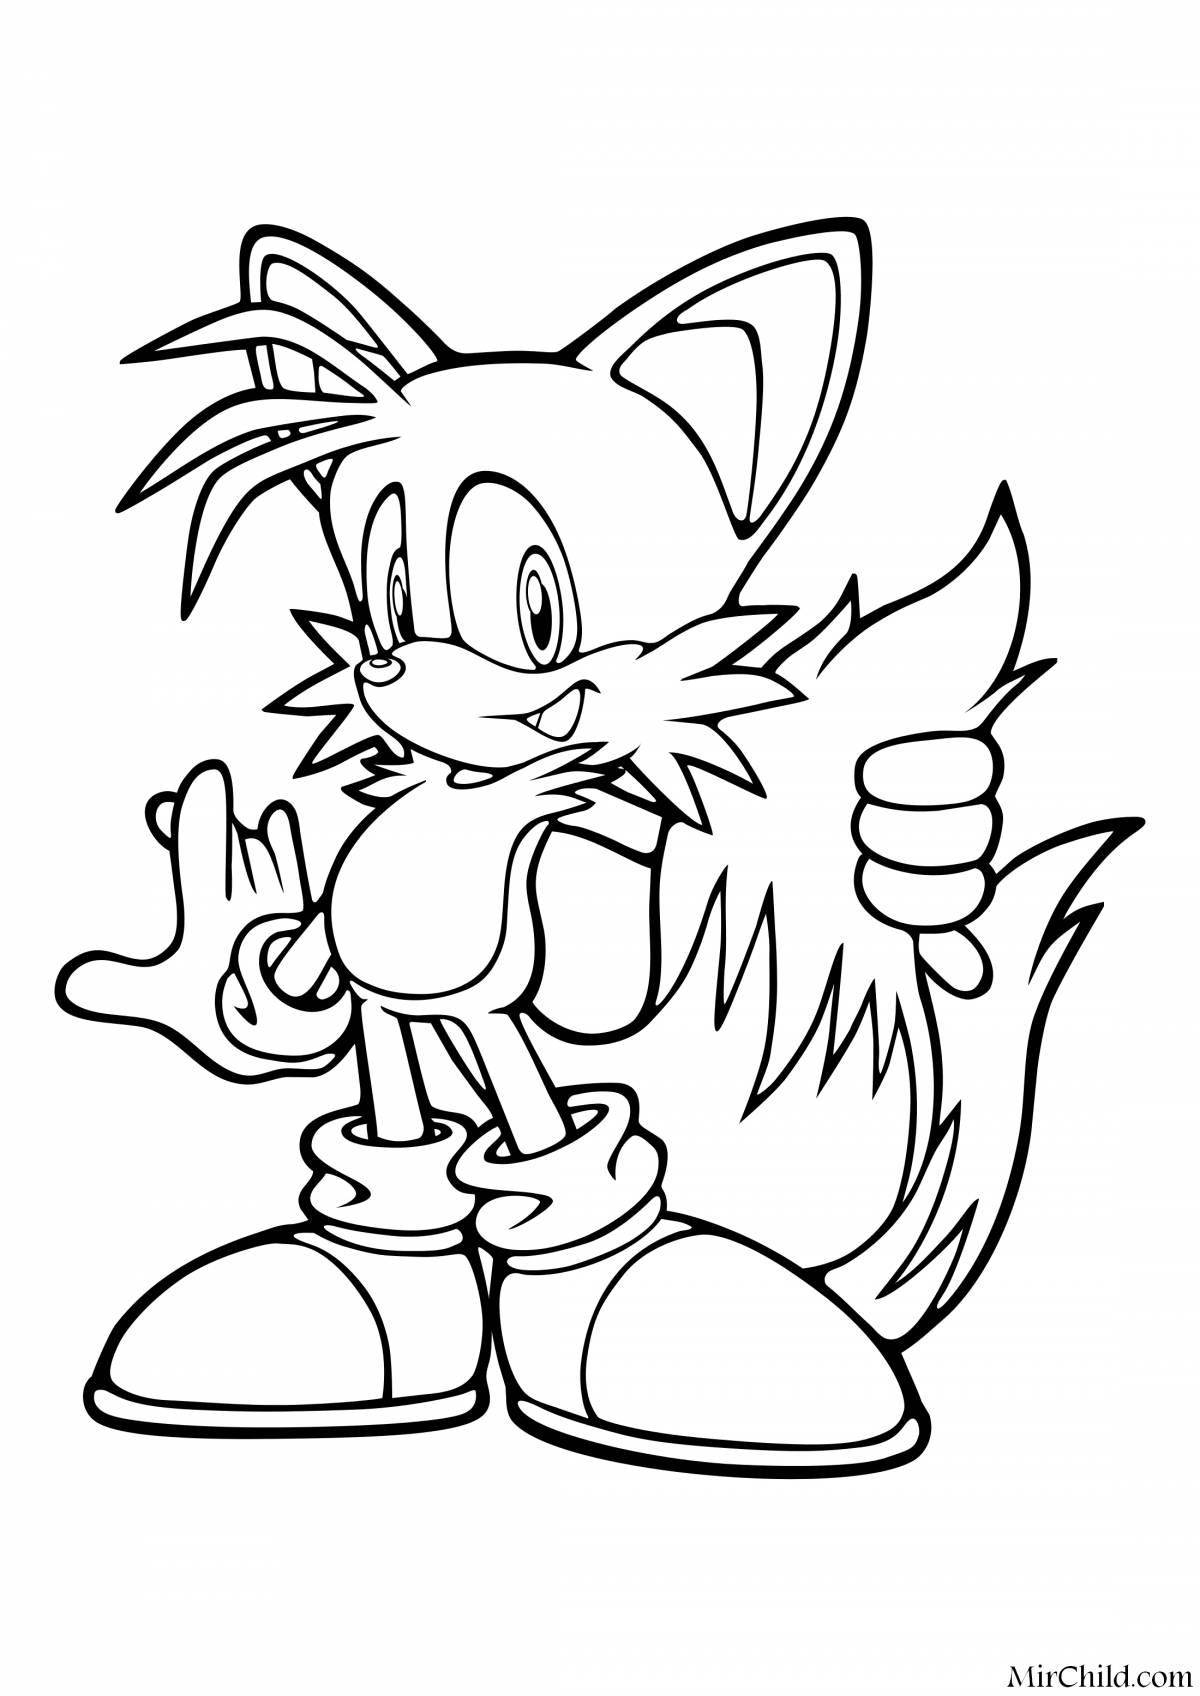 Zany coloring sonic 2